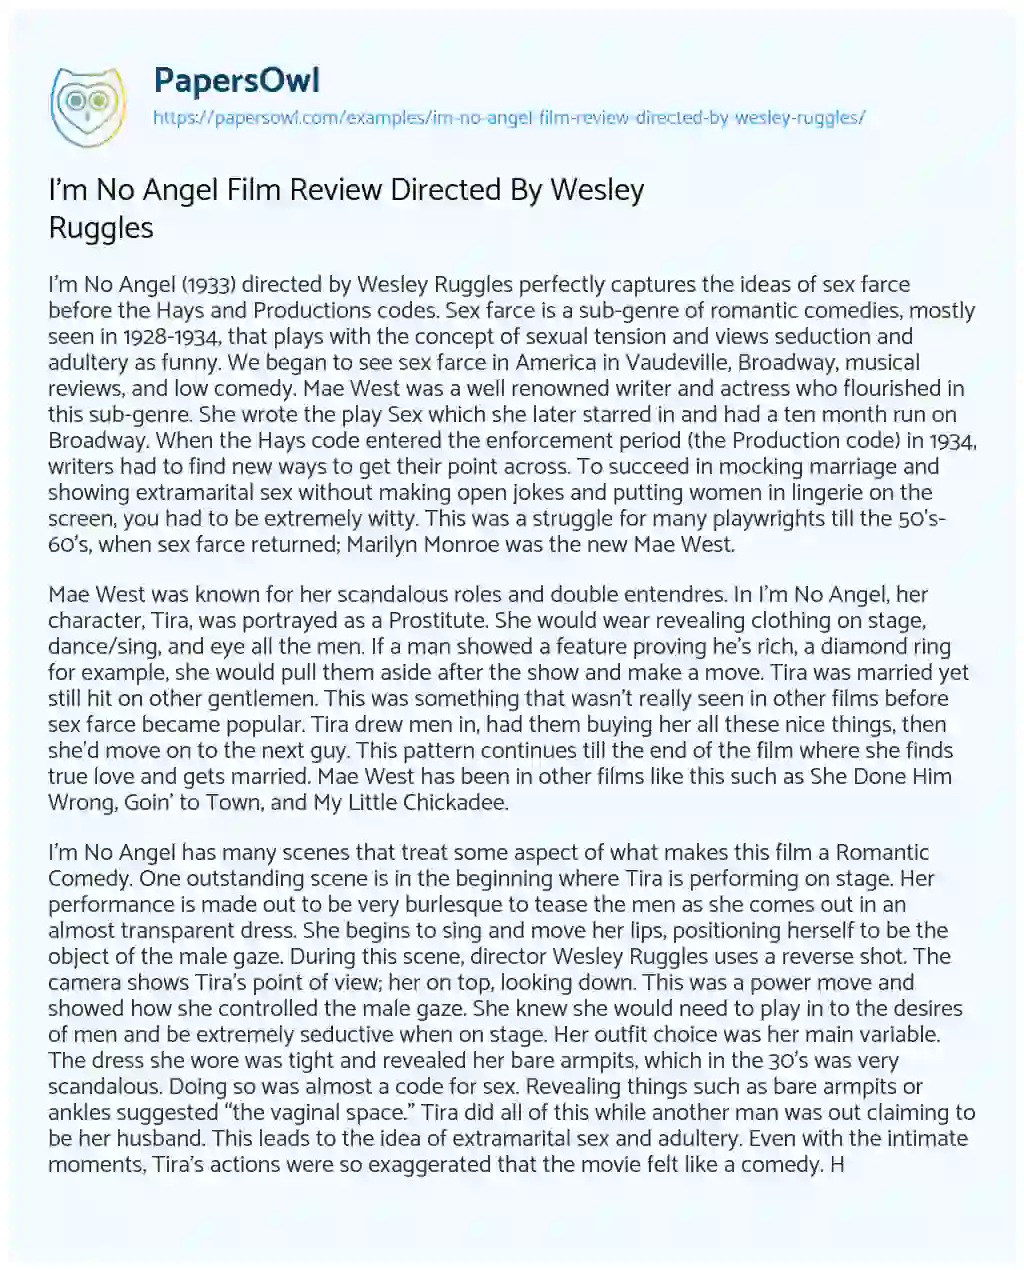 Essay on I’m no Angel Film Review Directed by Wesley Ruggles